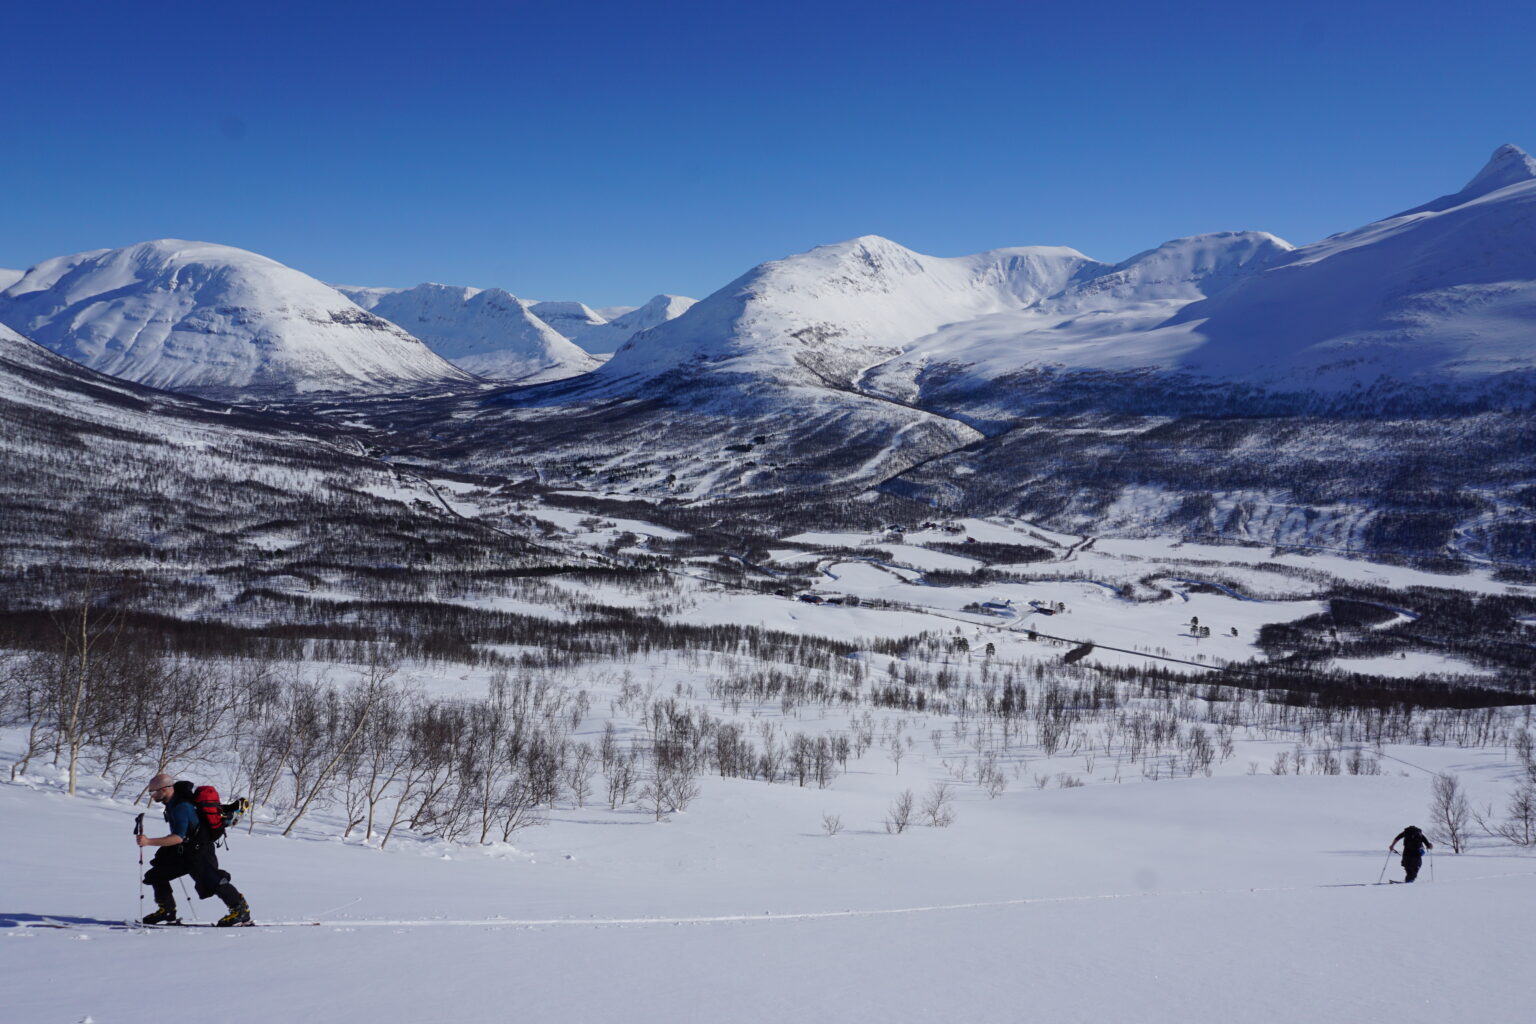 Ski touring with the Tamokdalen husset backcountry in the background